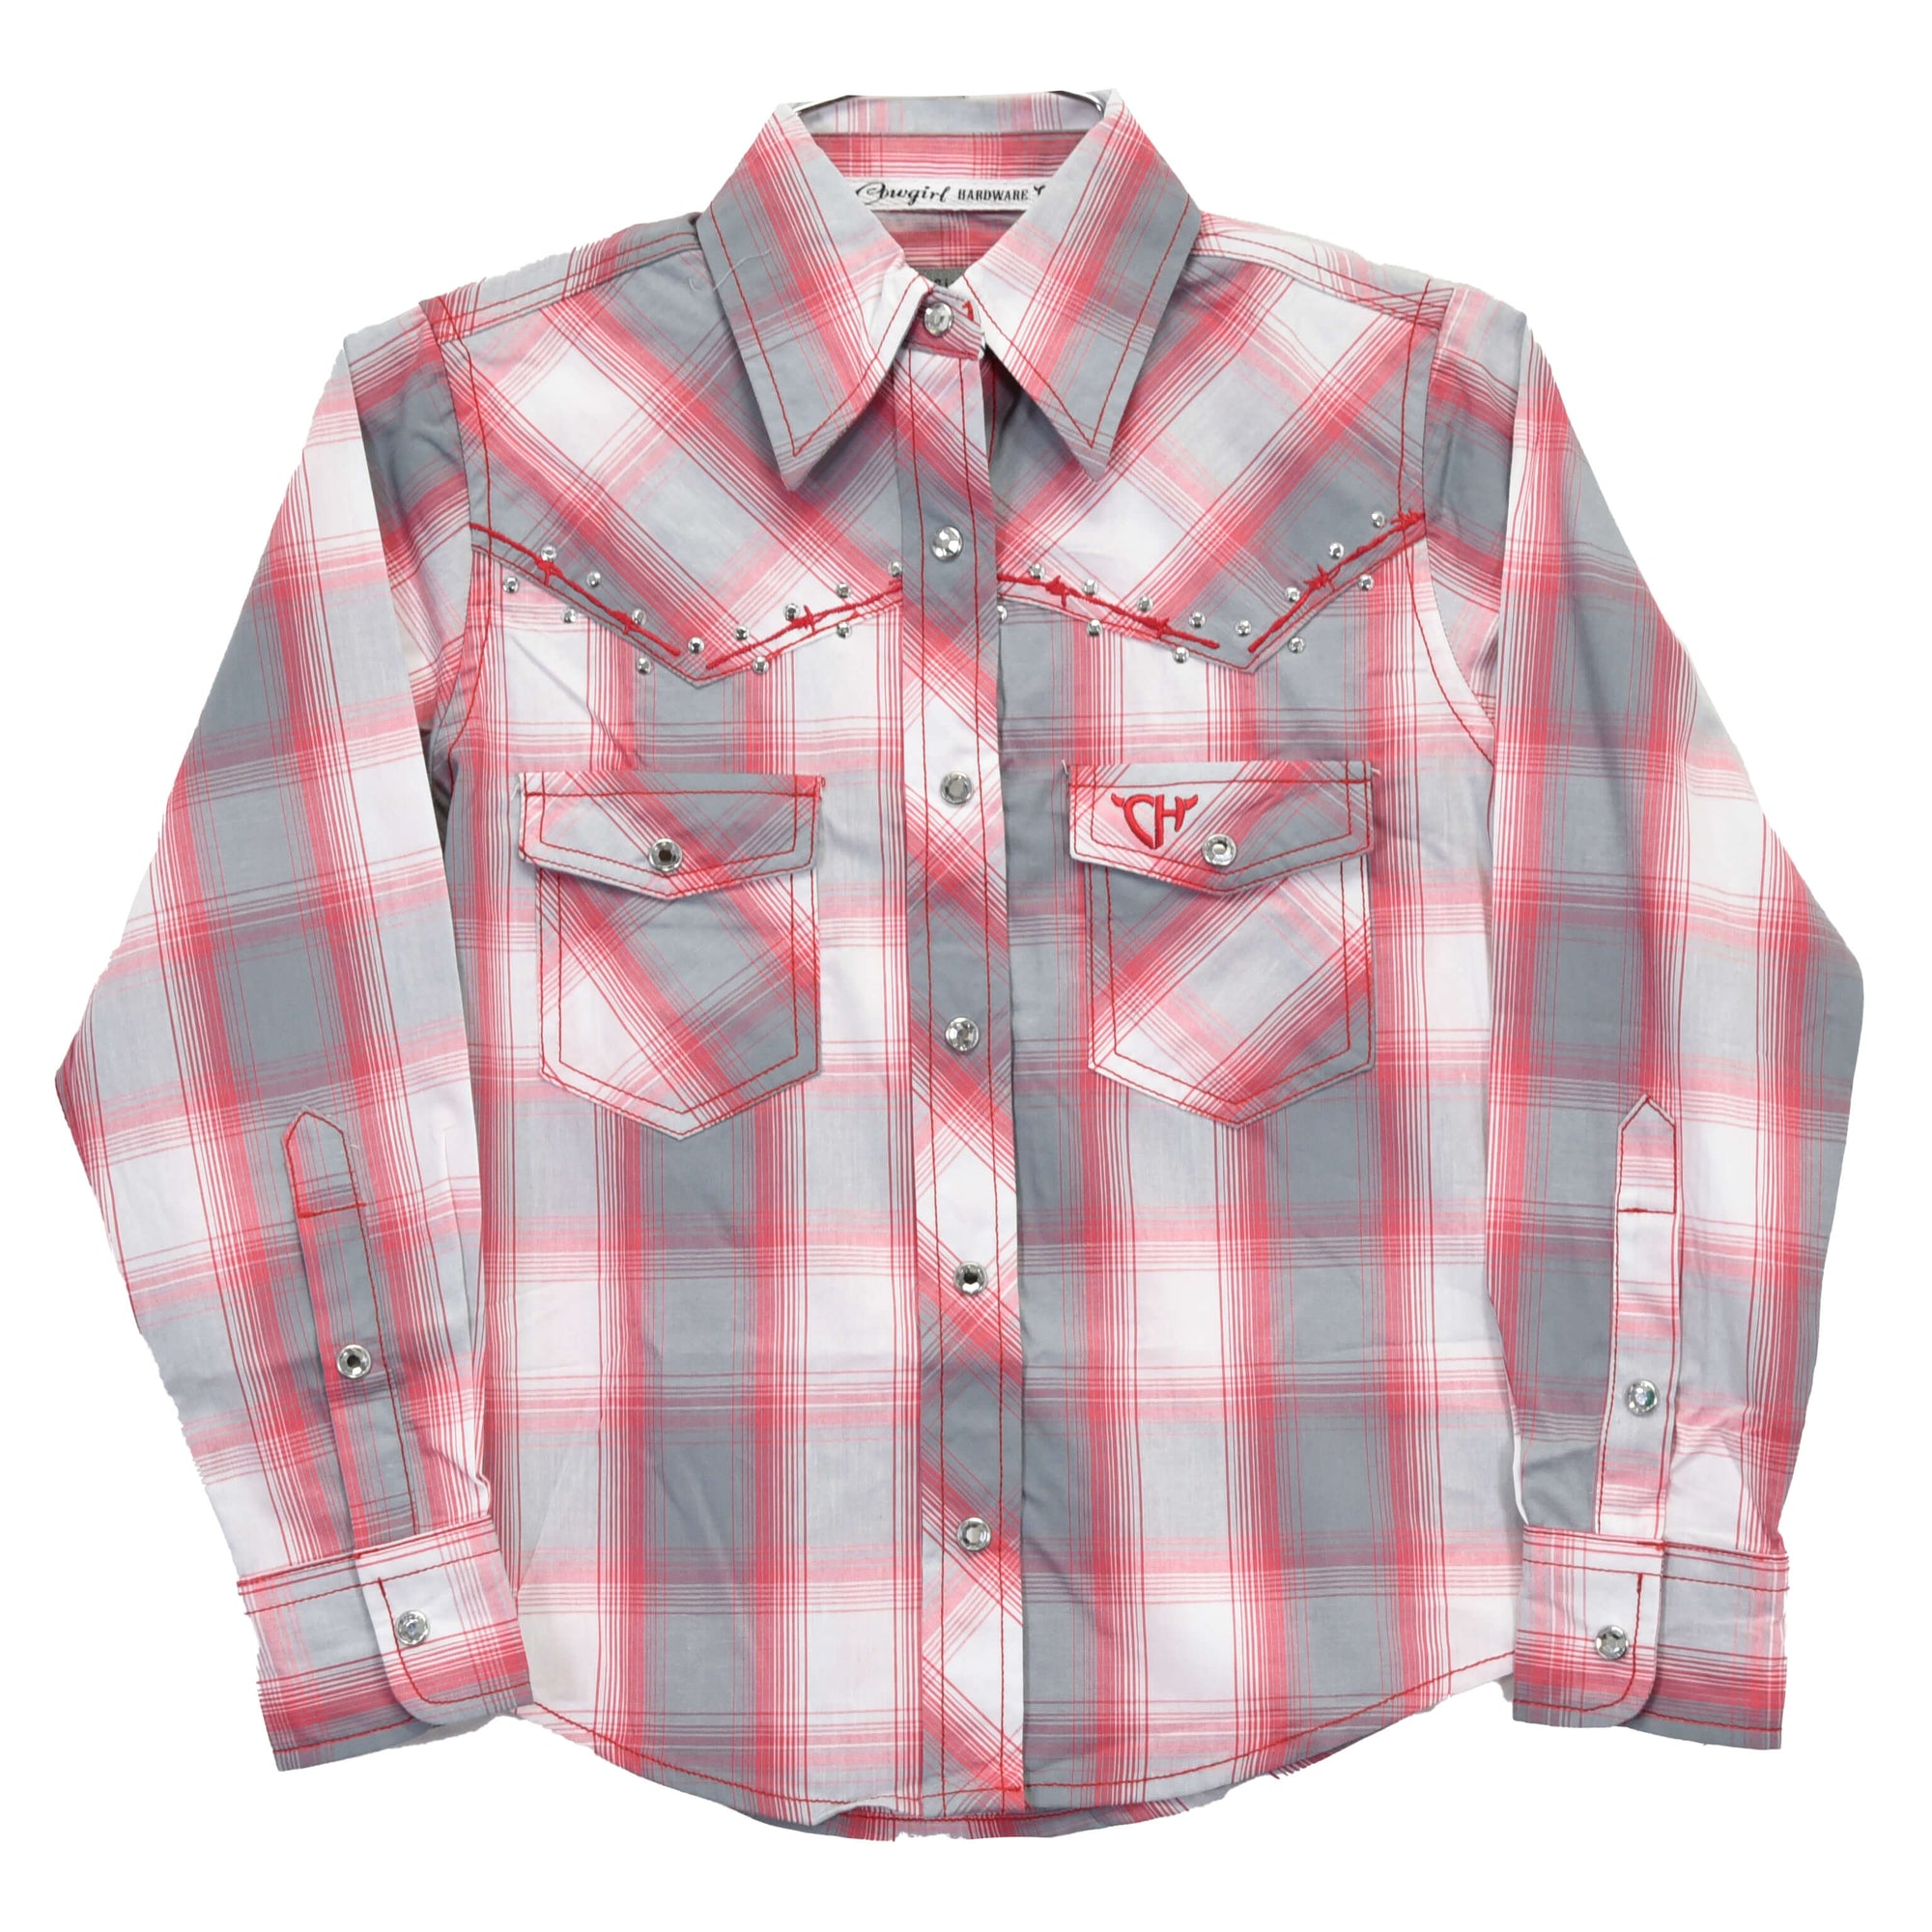 Toddler Girl's Cowgirl Hardware Pink Hombre Long Sleeve Western Shirt from Cowboy Hardware